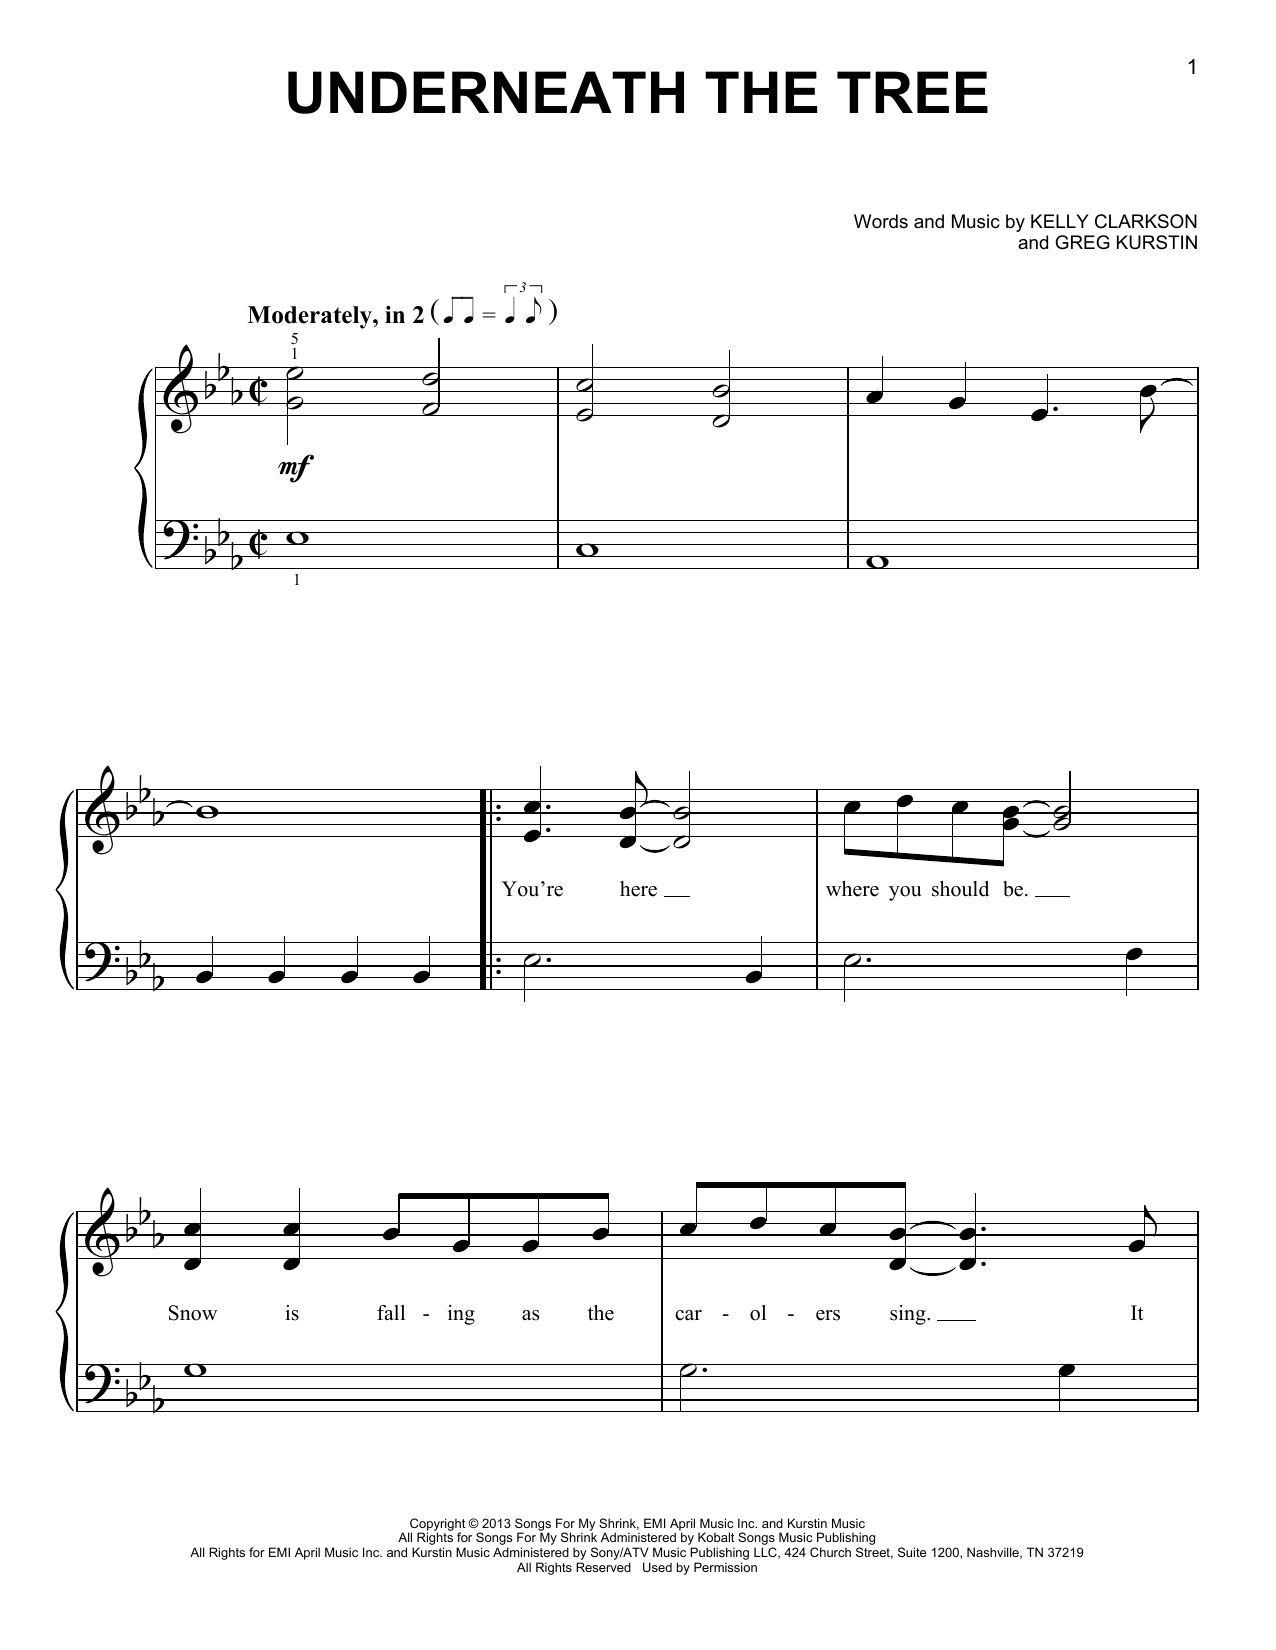 Download Kelly Clarkson Underneath The Tree Sheet Music